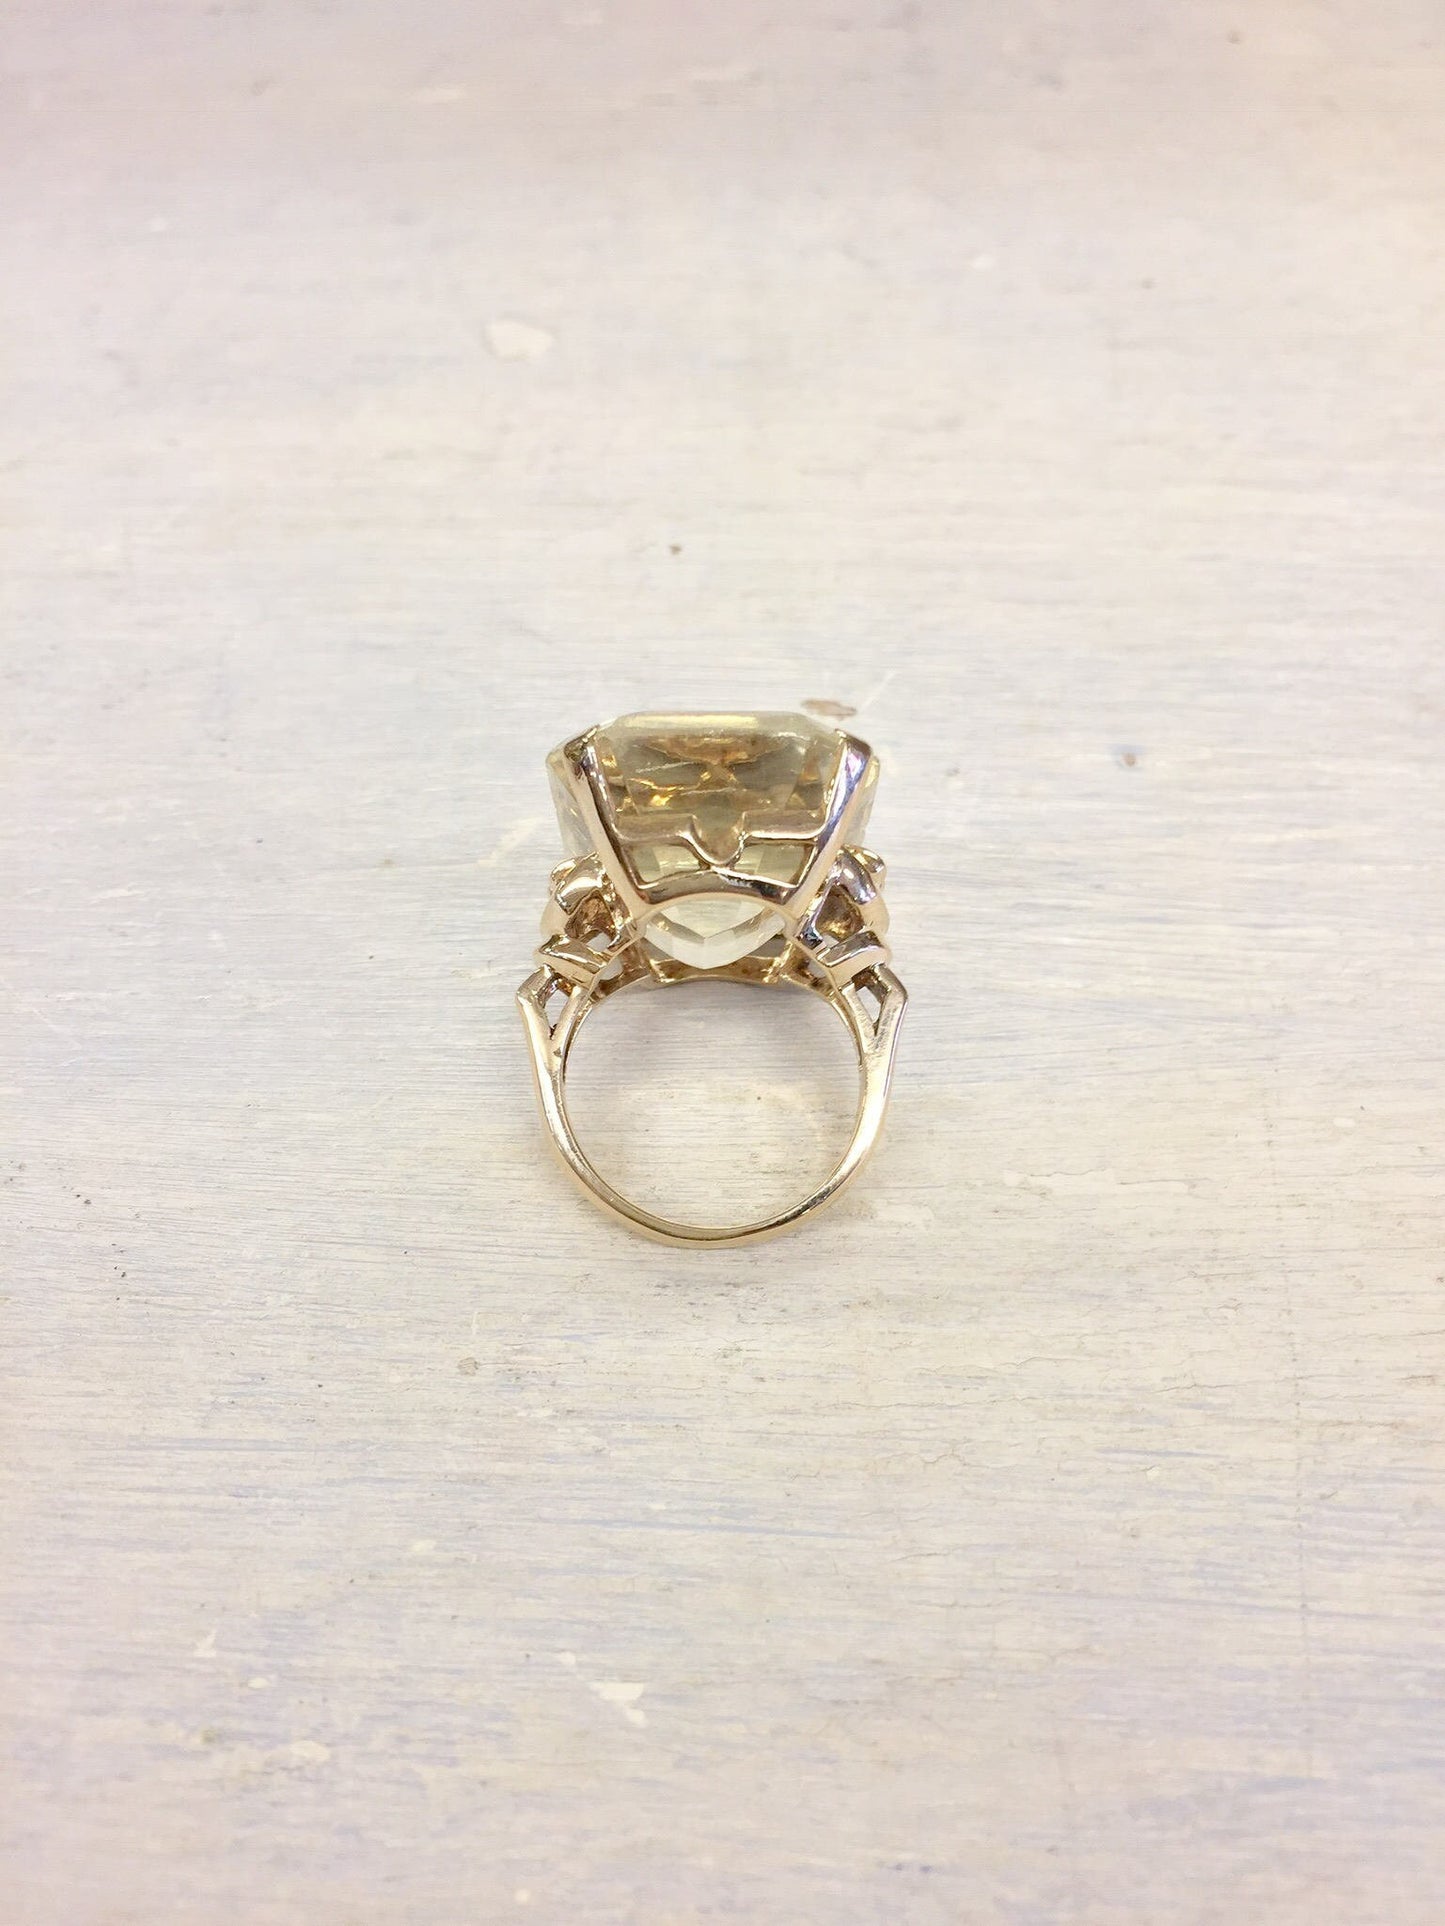 14 karat yellow gold vintage cocktail ring with large faceted citrine gemstone centerpiece surrounded by textured gold prongs, displayed on plain white background